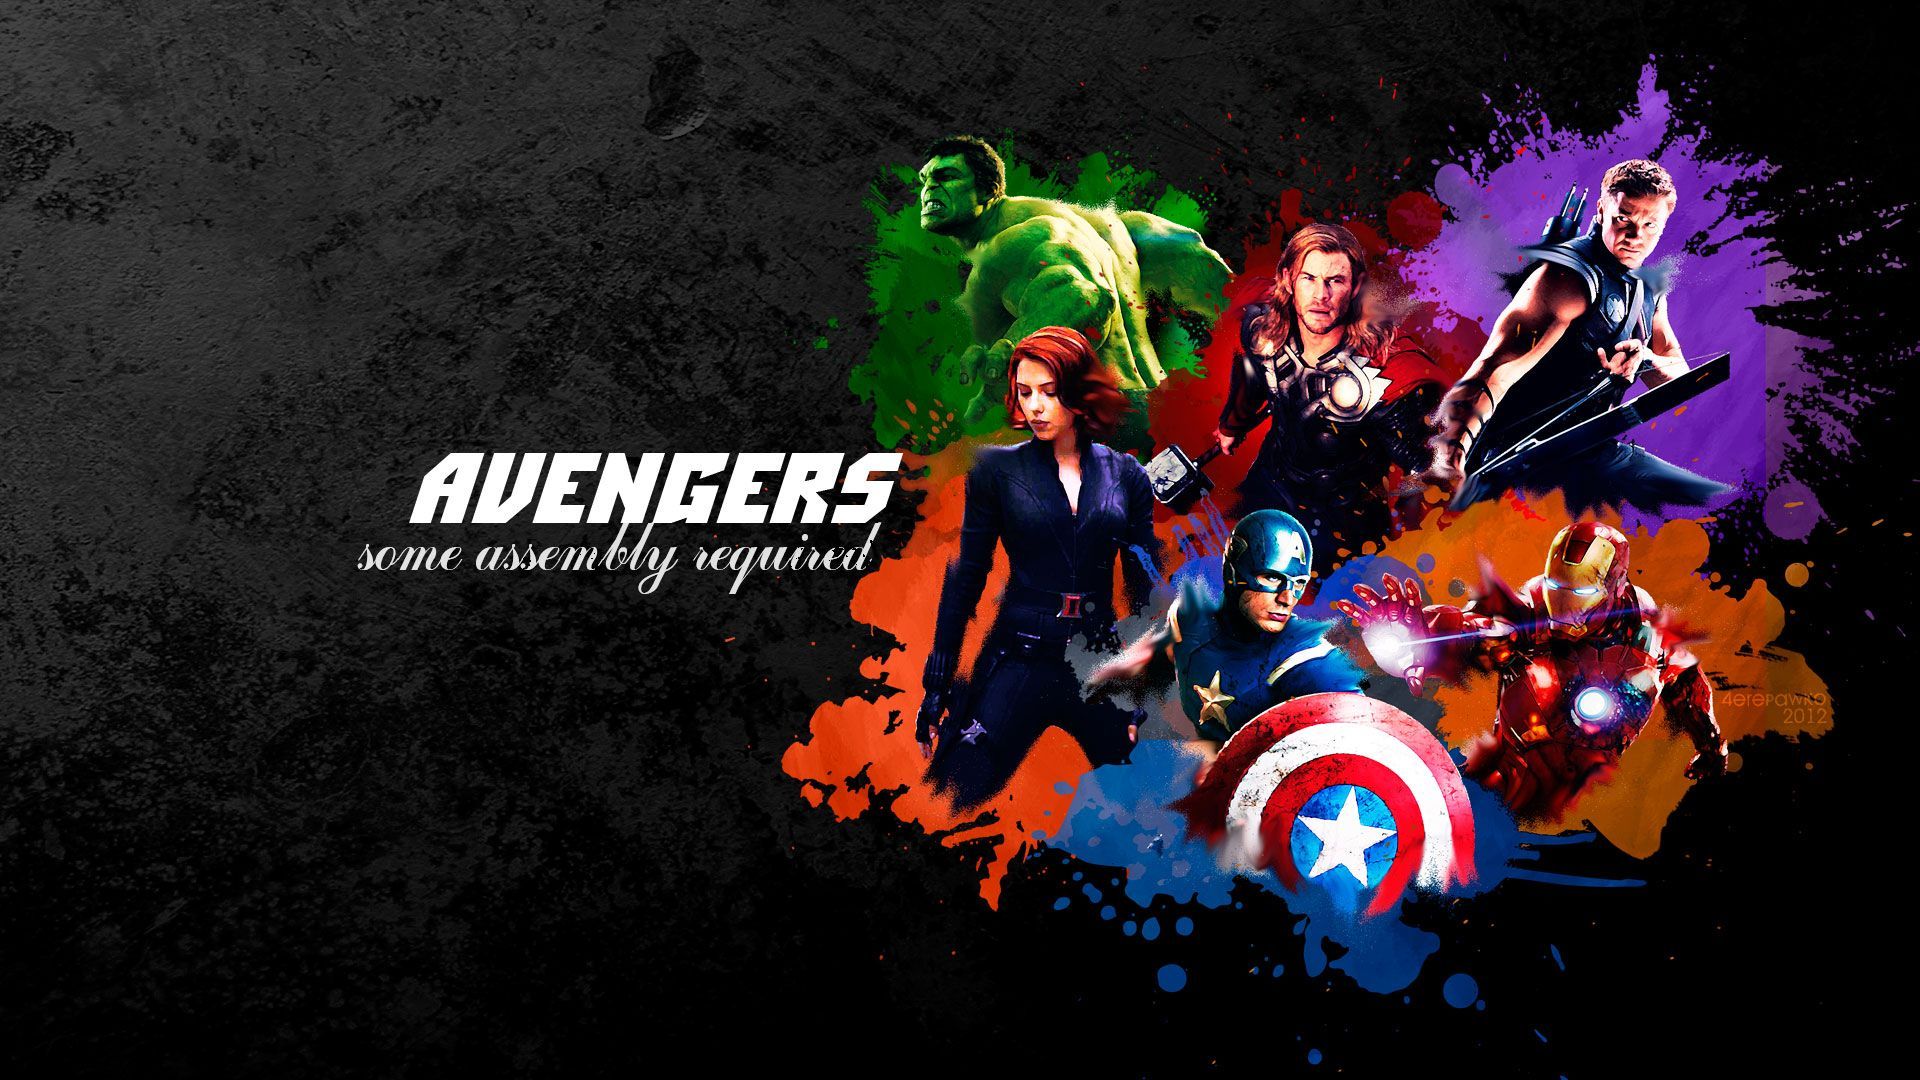 Cool Avengers Pictures.jpg